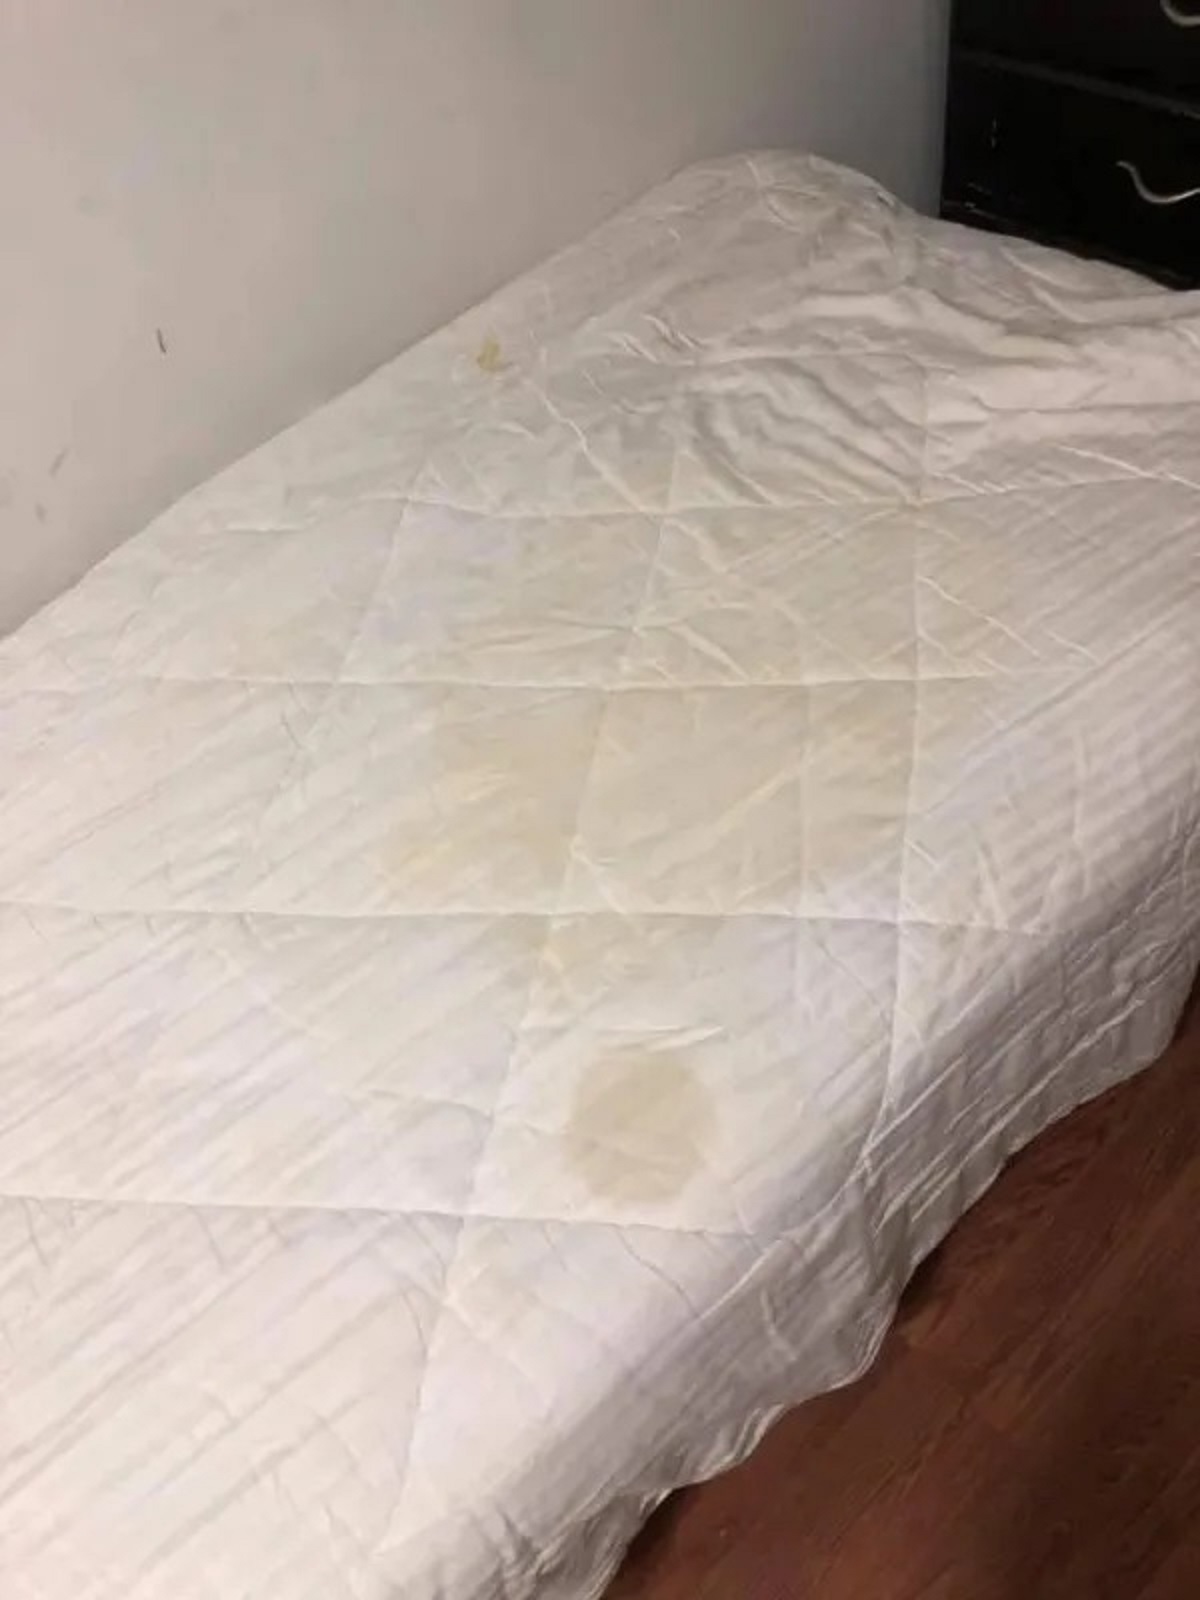 The sheets at my Airbnb. Homeowner wouldn’t answer the phone because it was the sabbath and he couldn’t work.